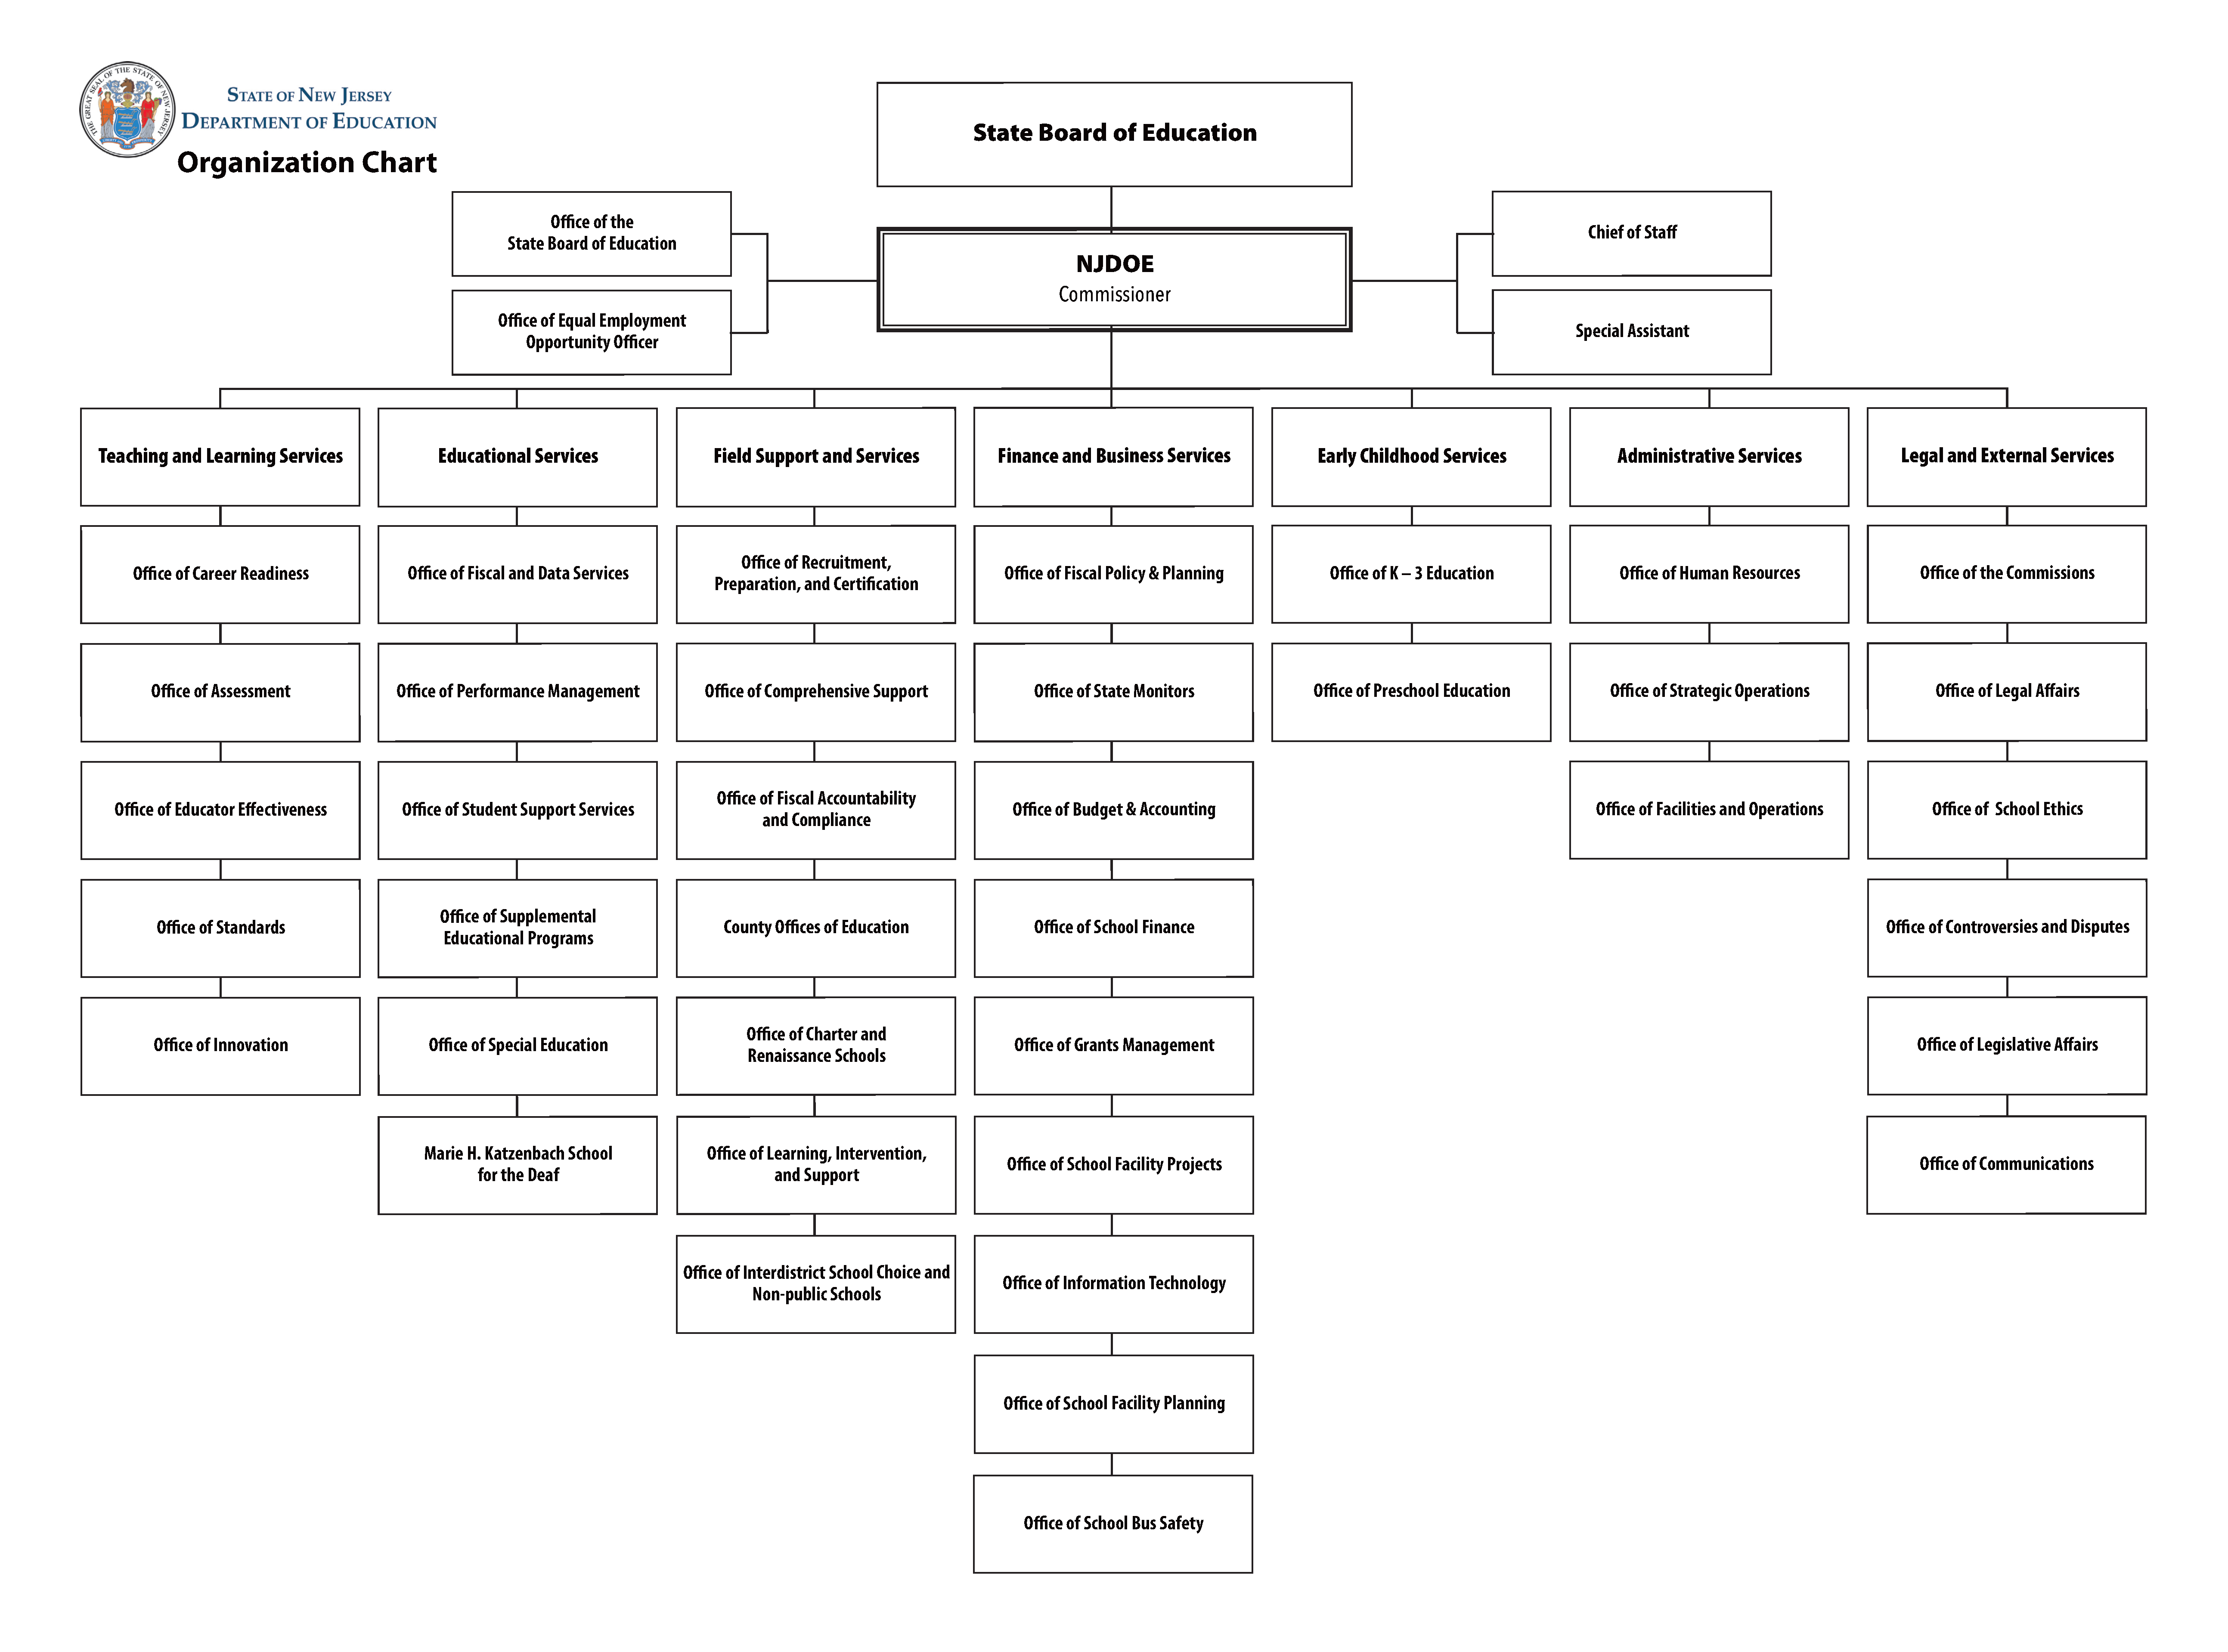 Organizational Chart. All content from chart is available by opening the &amp;amp;quot;accessible organizational chart&amp;amp;quot; link